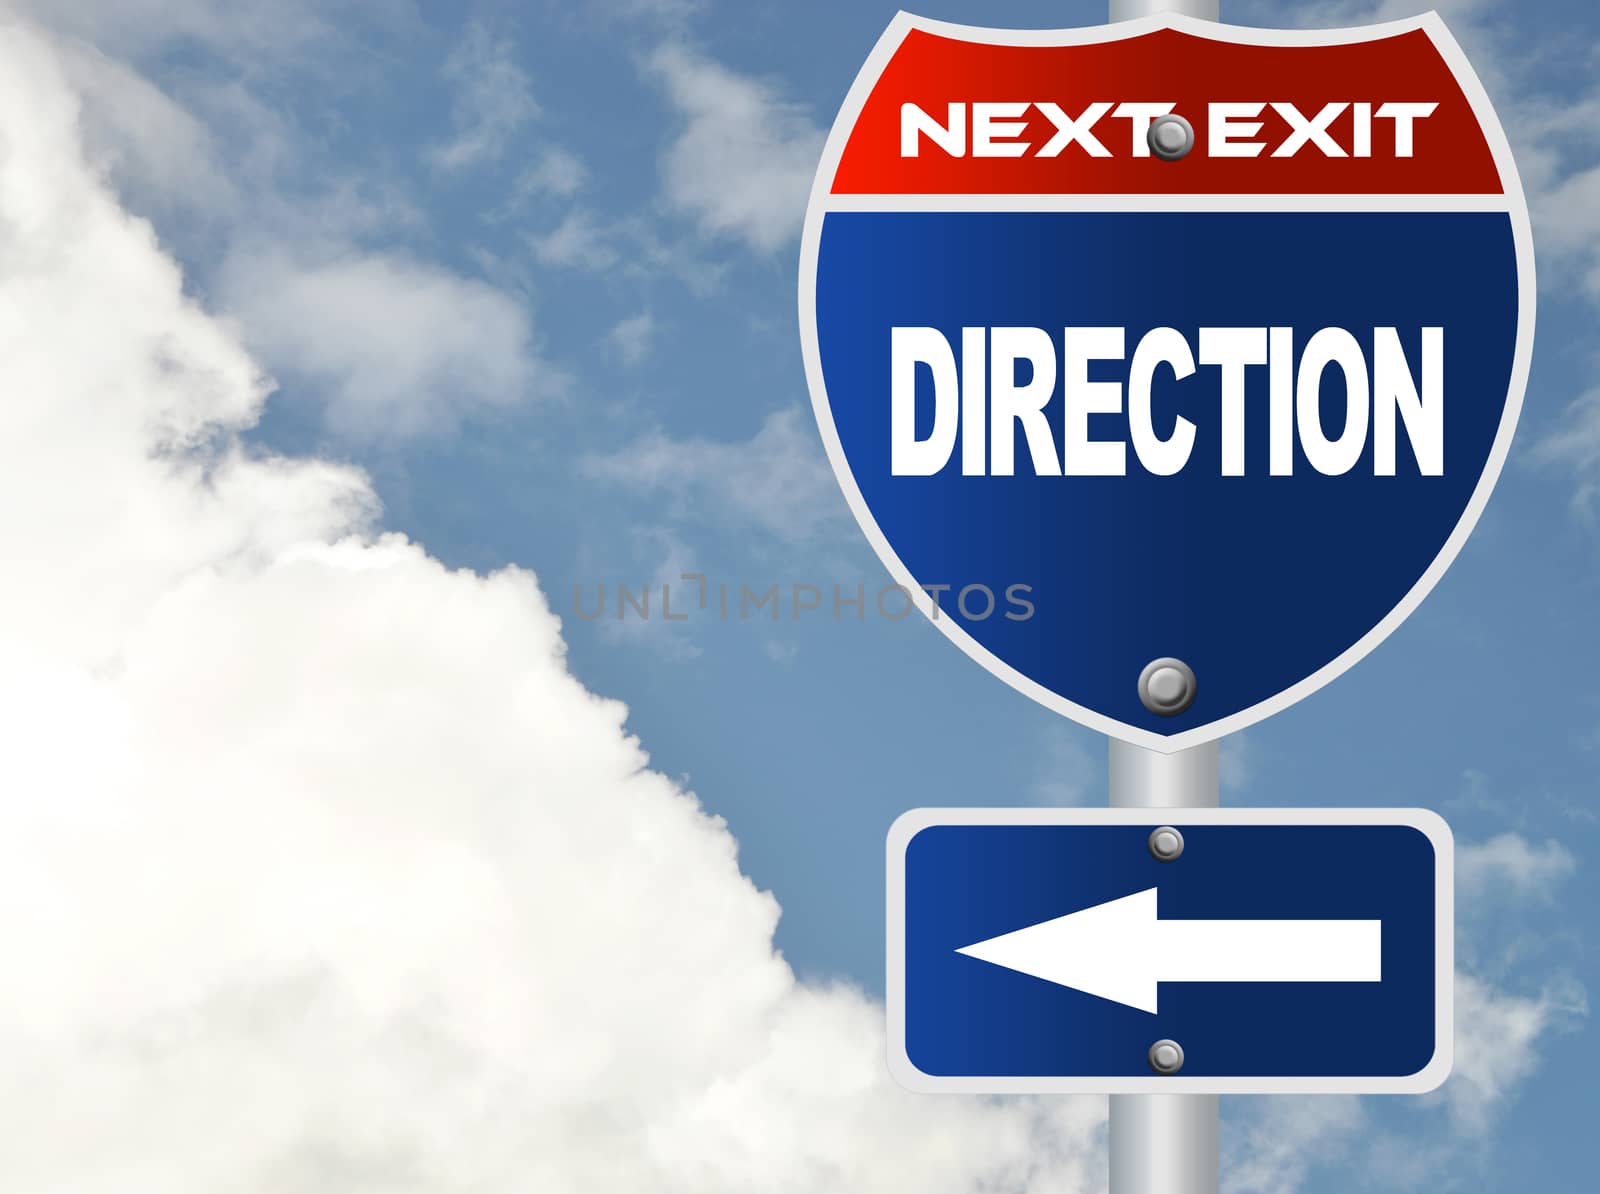 Direction road sign